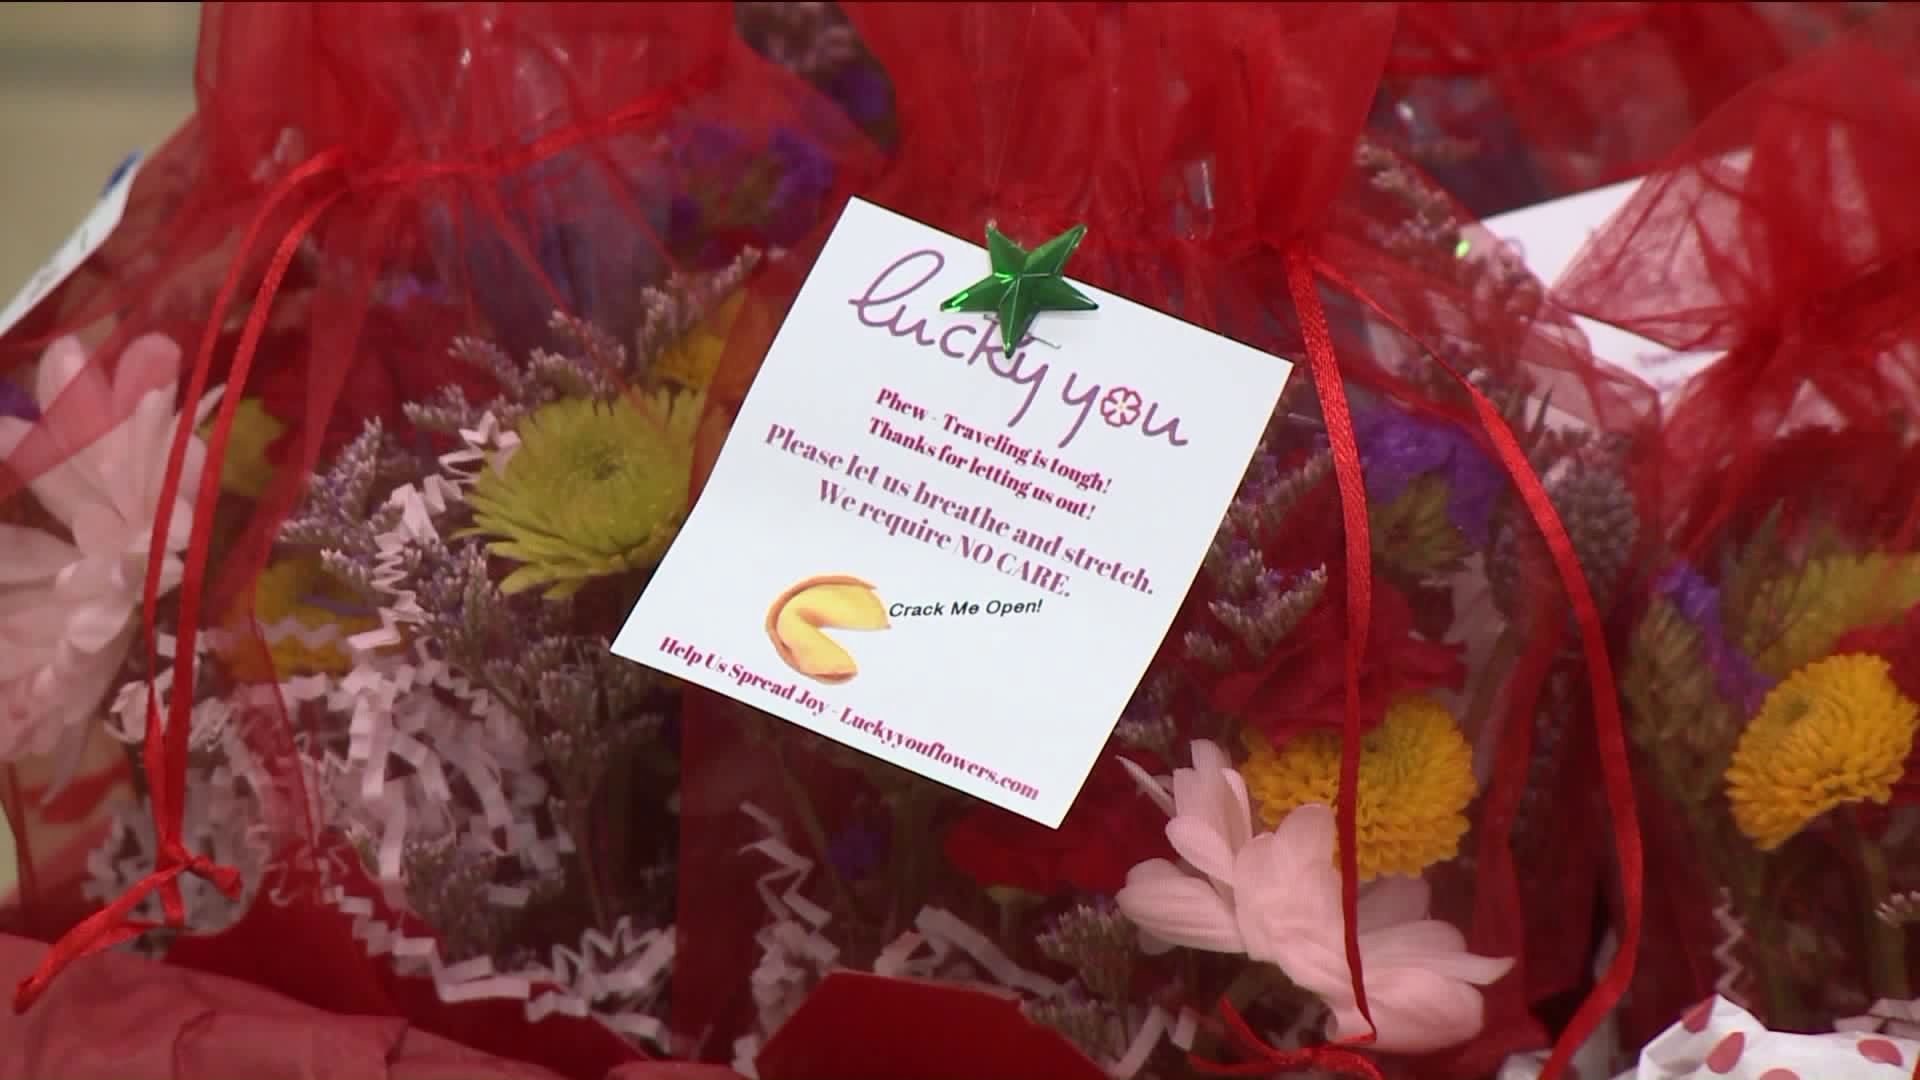 Flowers show up in force for vets in Rocky Hill